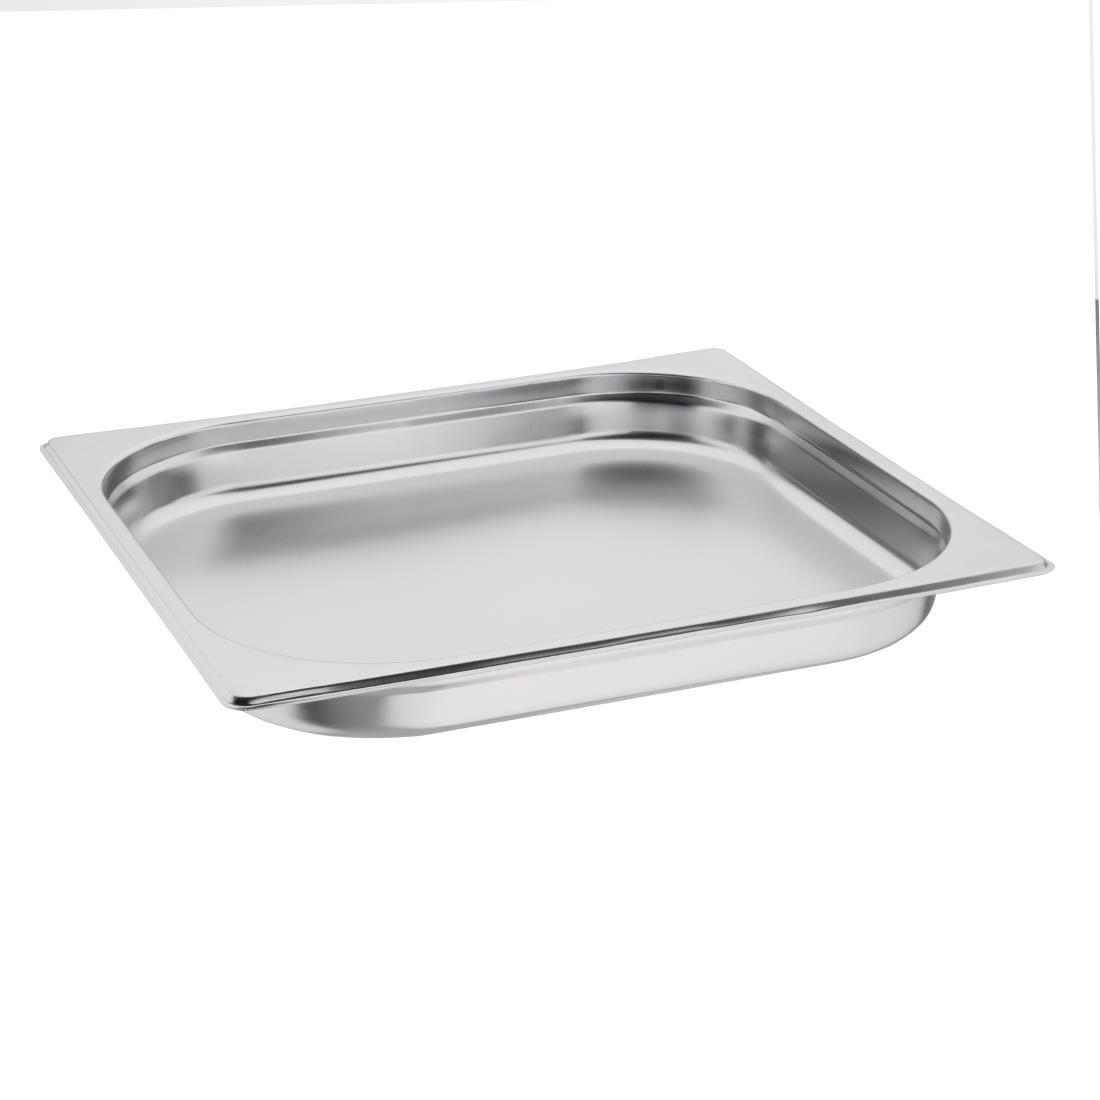 Vogue Stainless Steel Gastronorm 2/3 Pan 20mm - GM314  - 1